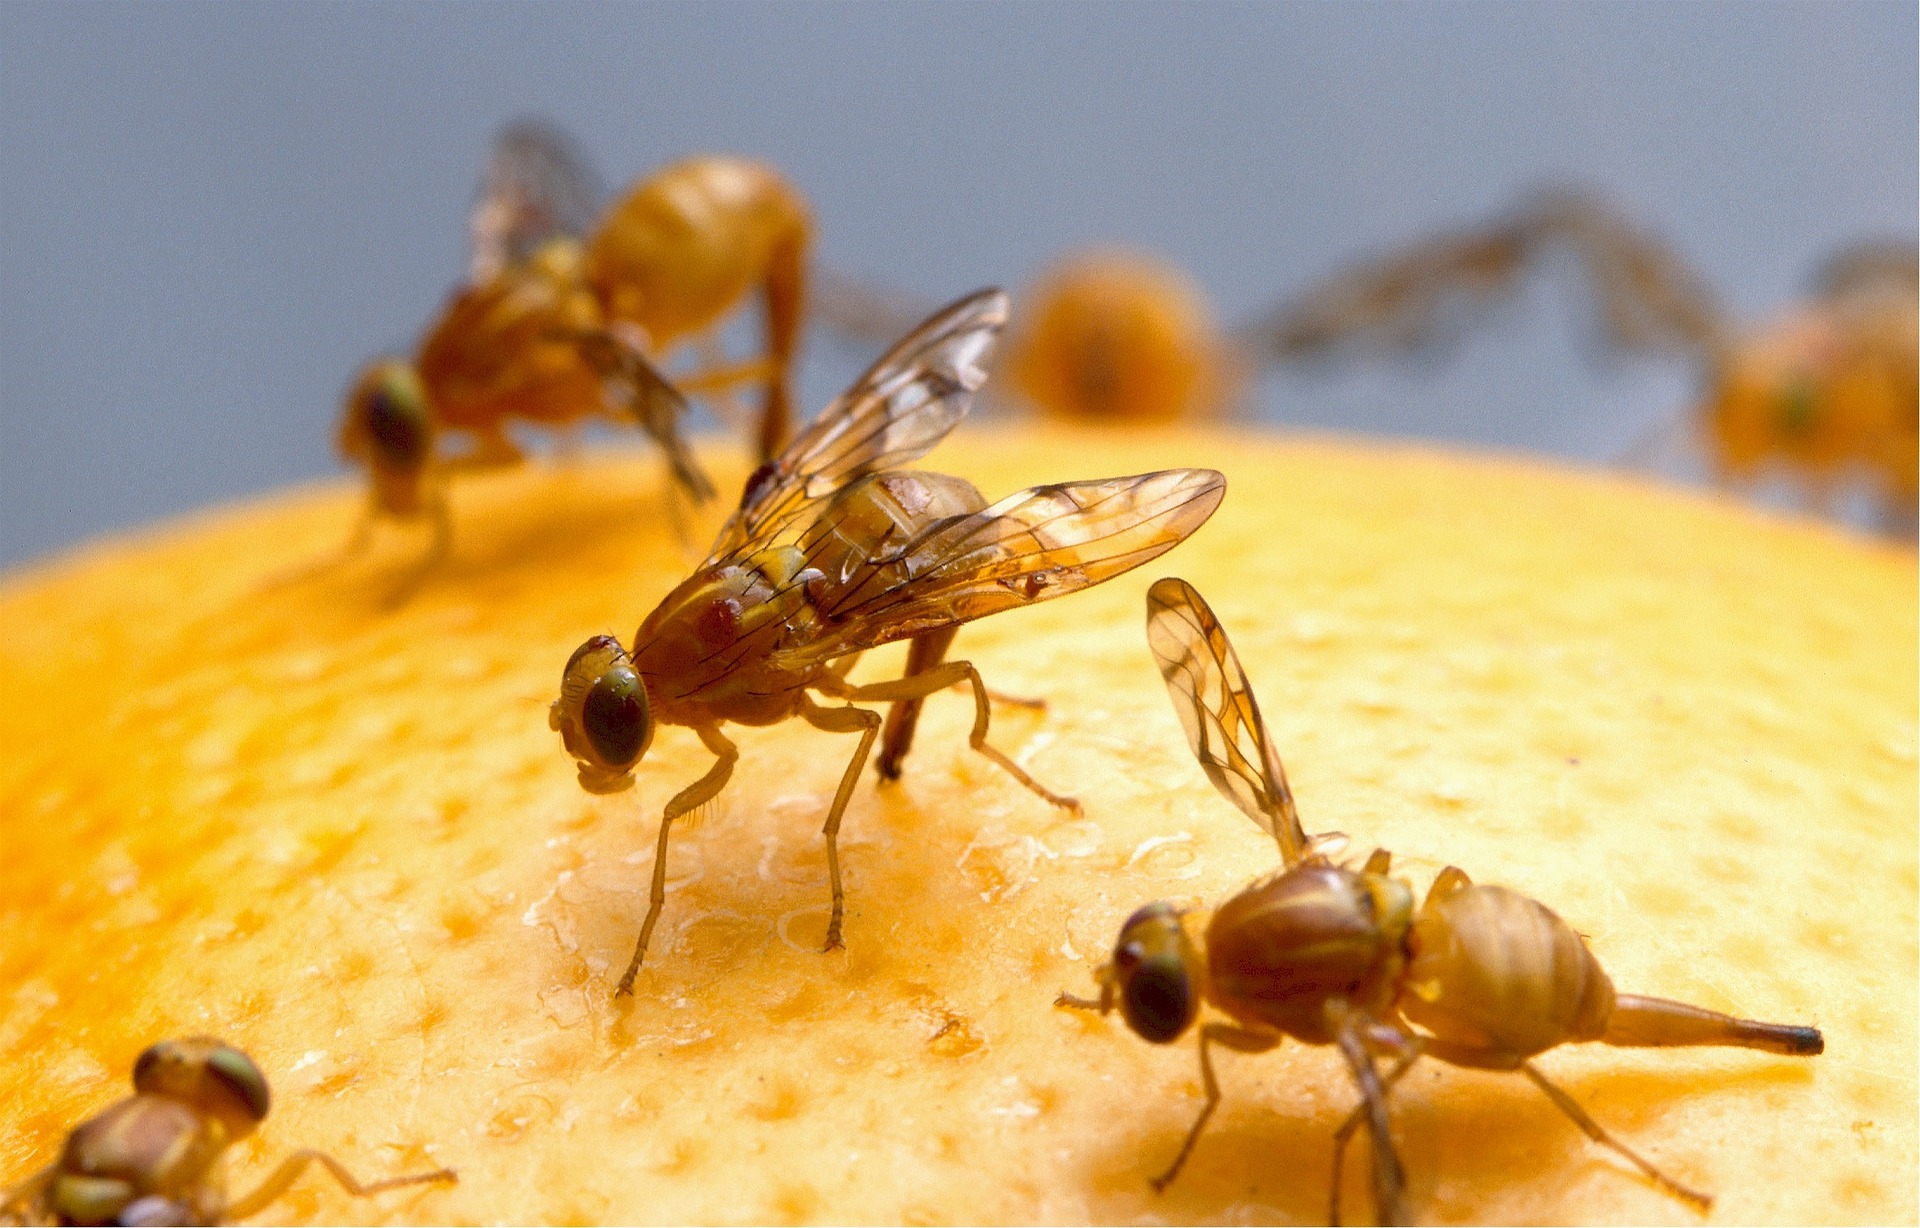 How to Get Rid of Fruit Flies in Your Apartment